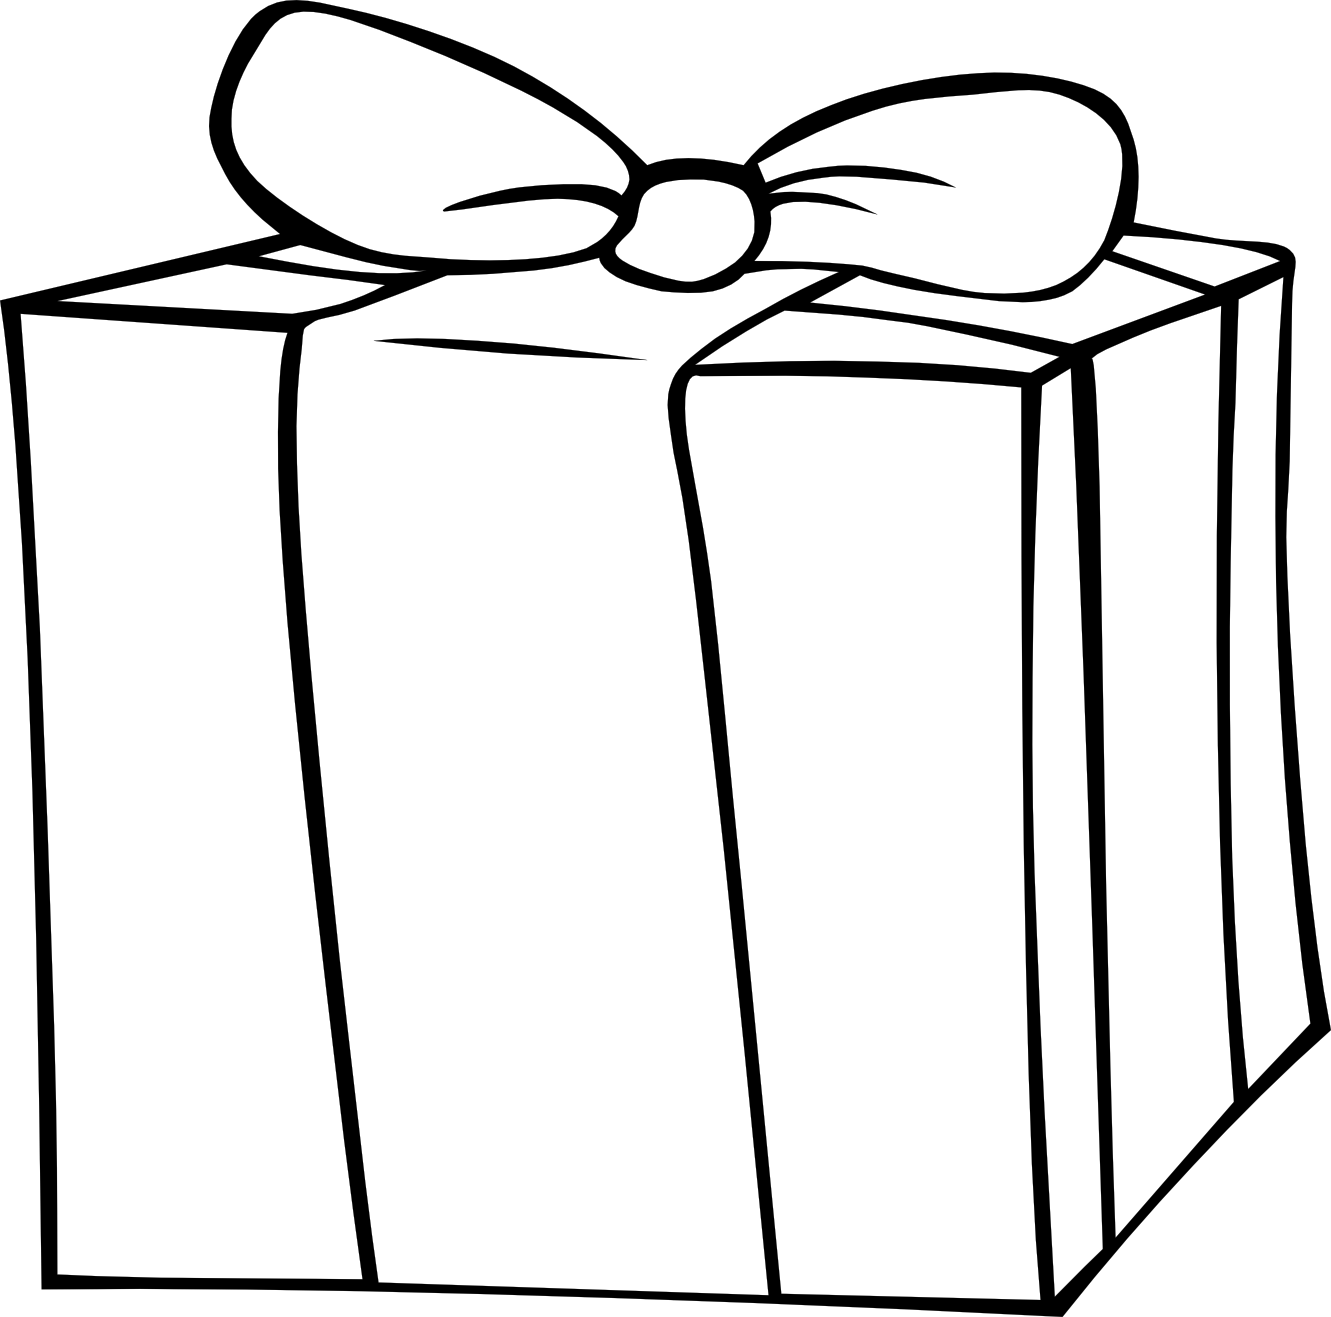 Presents Clipart Black And White   Clipart Panda   Free Clipart Images